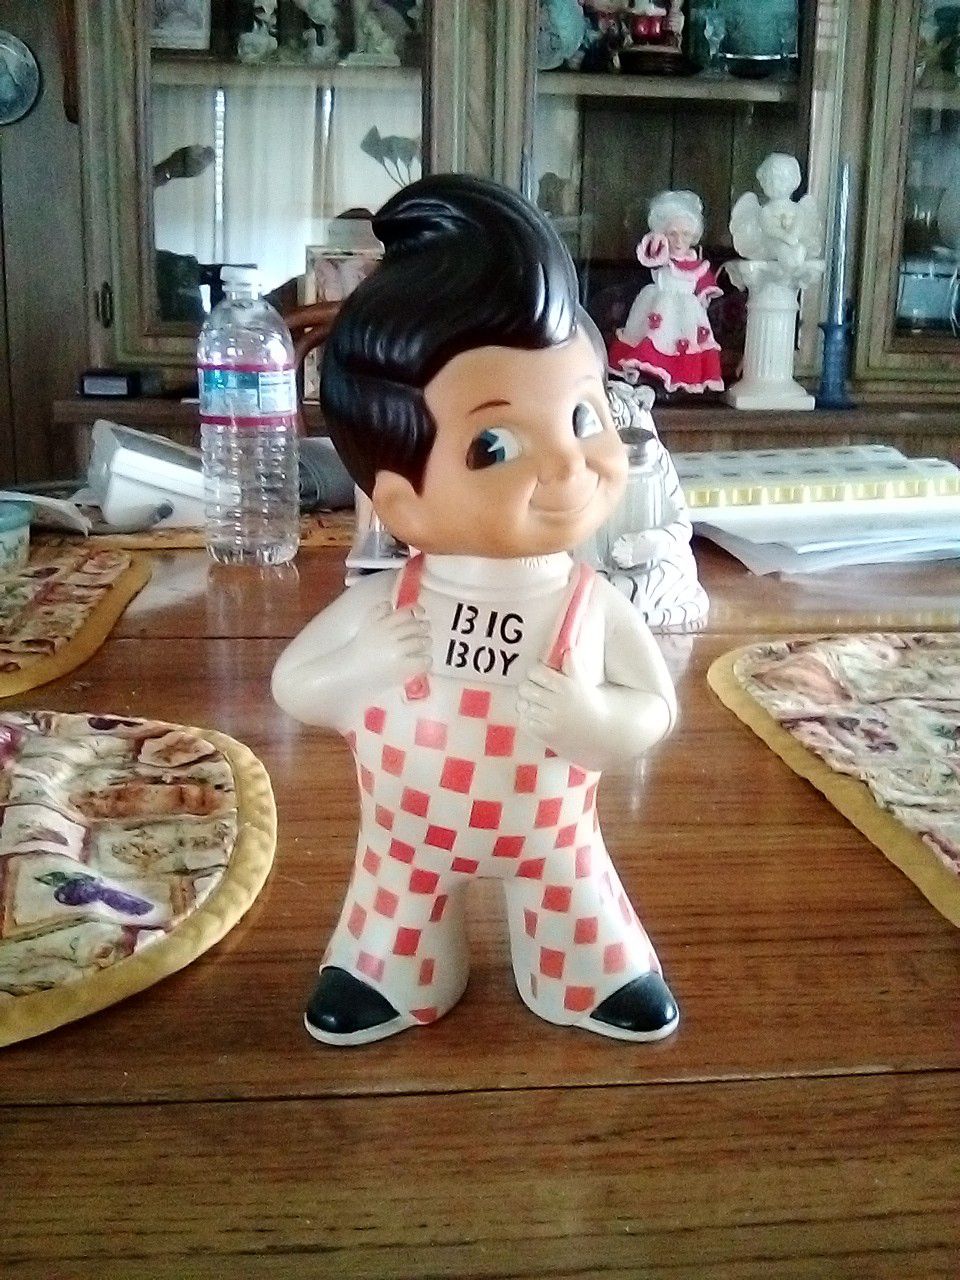 Bob's big boy very collectiblep make offer must be picked up